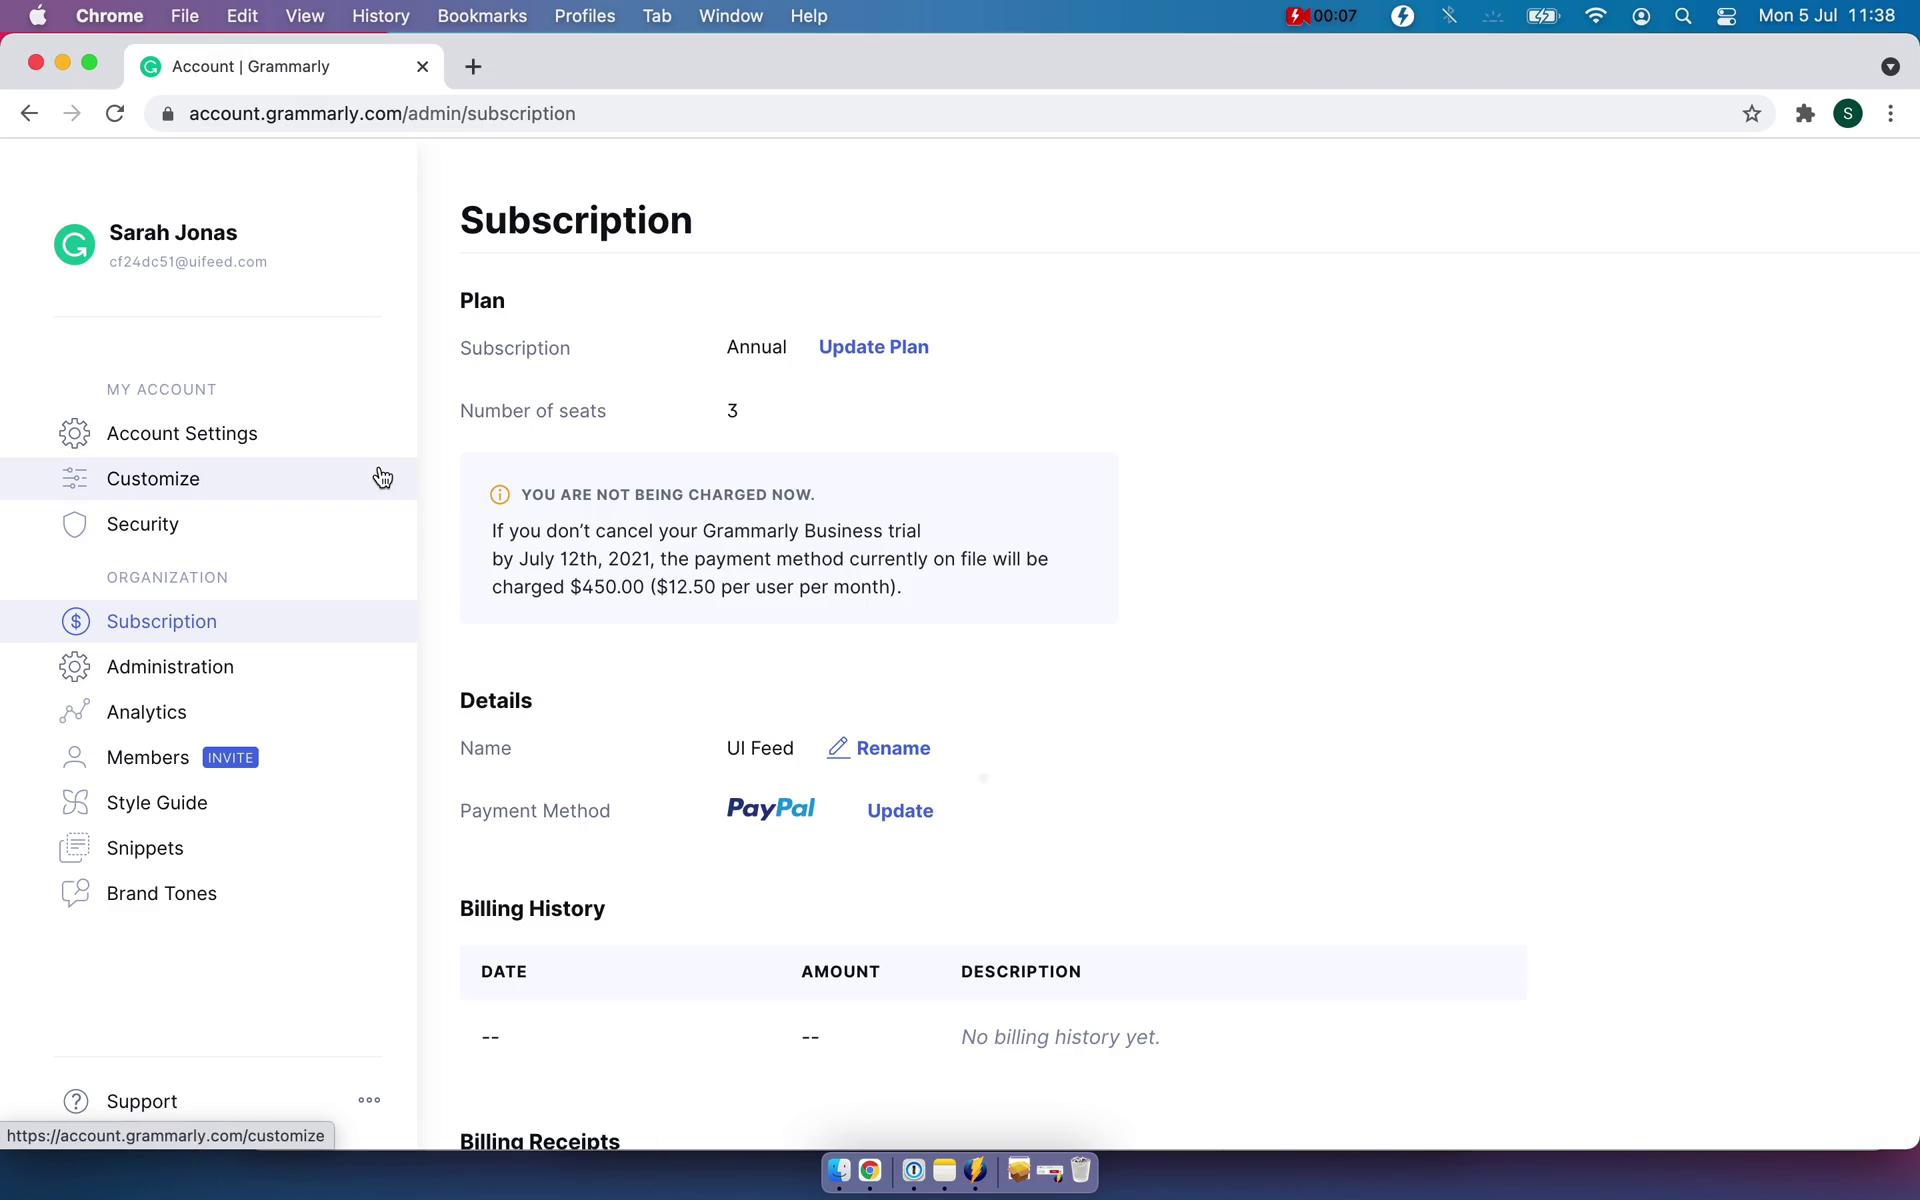 Screenshot of Manage subscription on Inviting people on Grammarly user flow